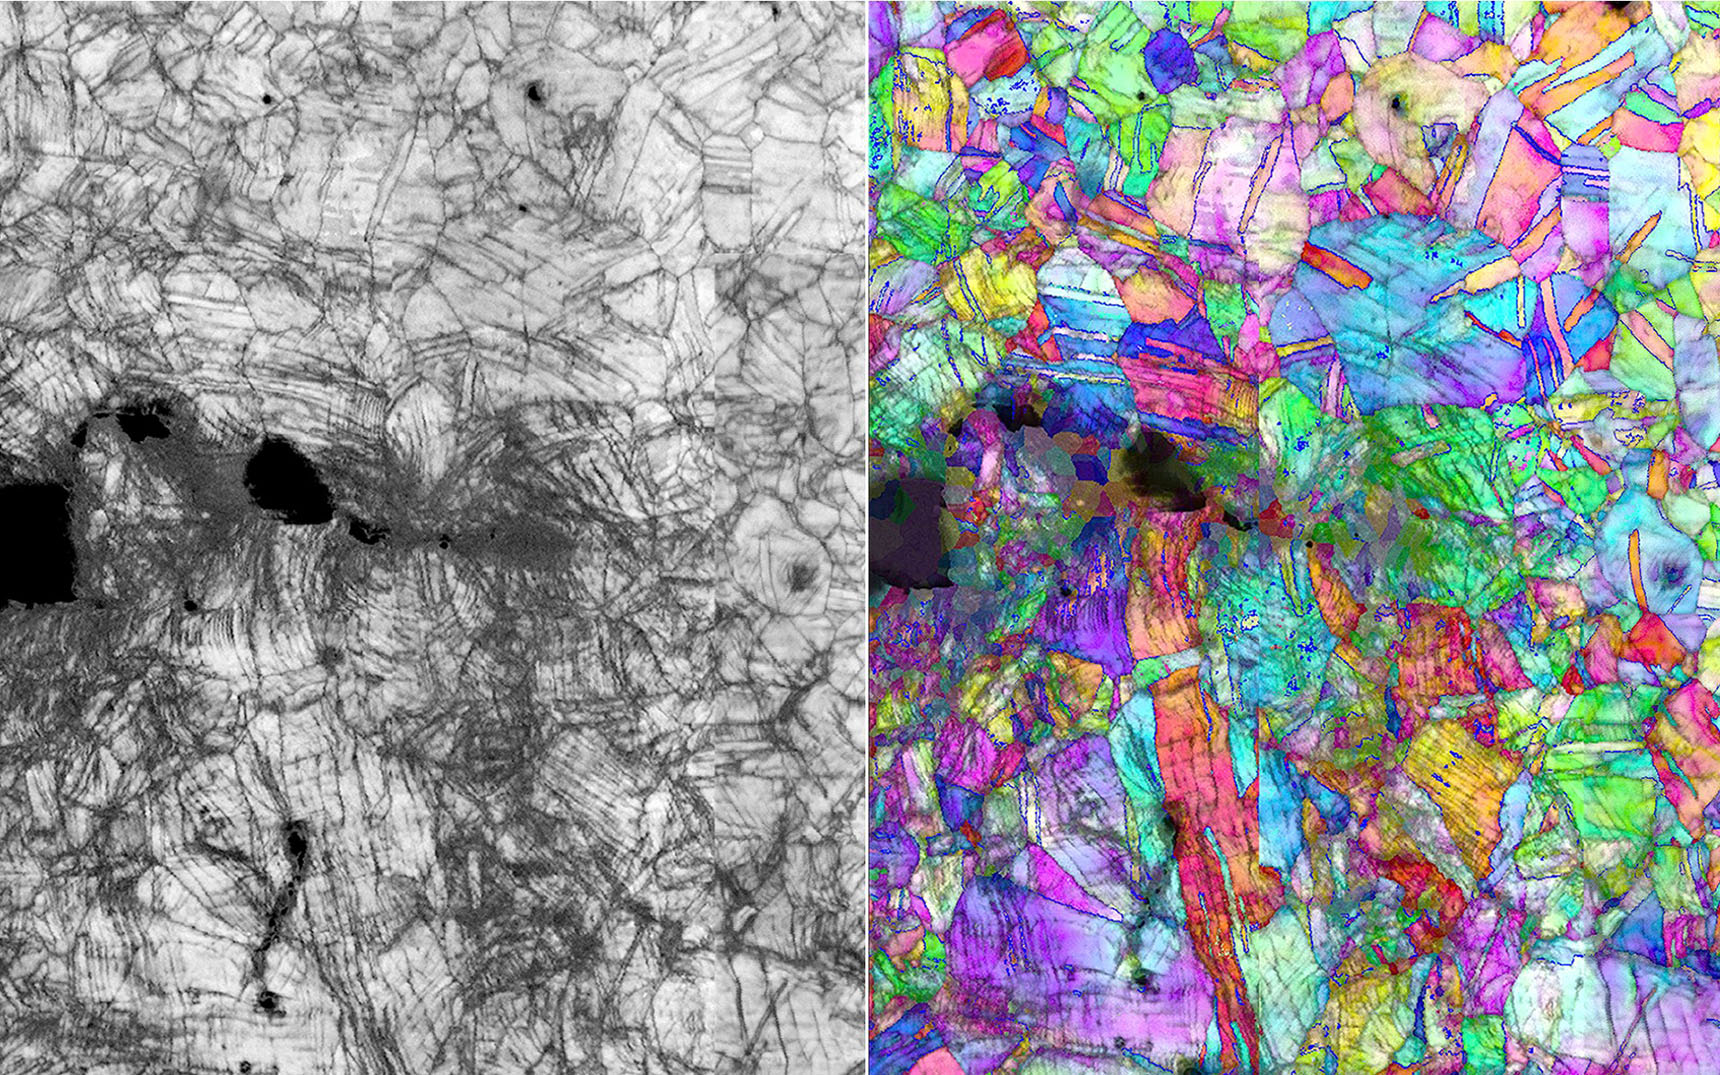 A black and white microscopy image of the material; it looks like zoomed in scratches on a hard surface on the left, then the same image in vivid multicolor on the right.